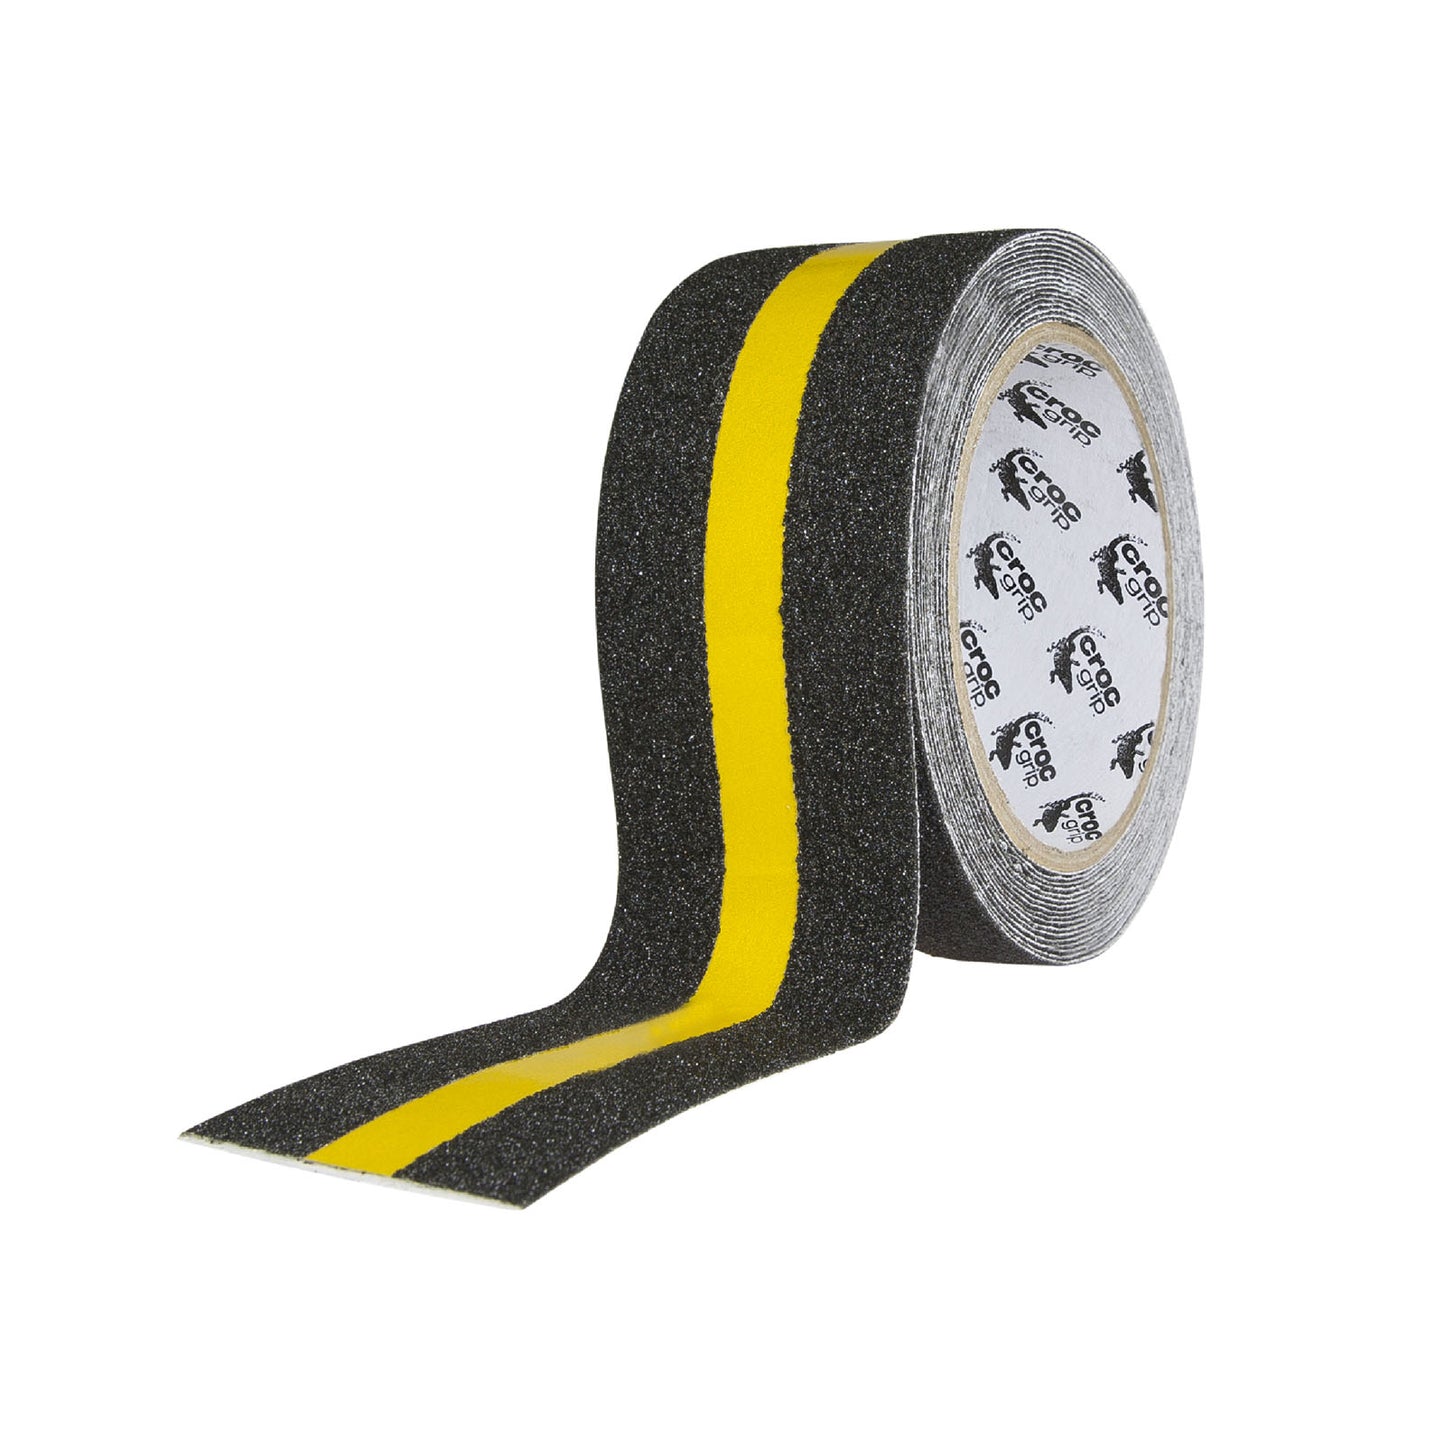 5M x 48MM Reflective Commercial High Grit Anti-Slip Tape